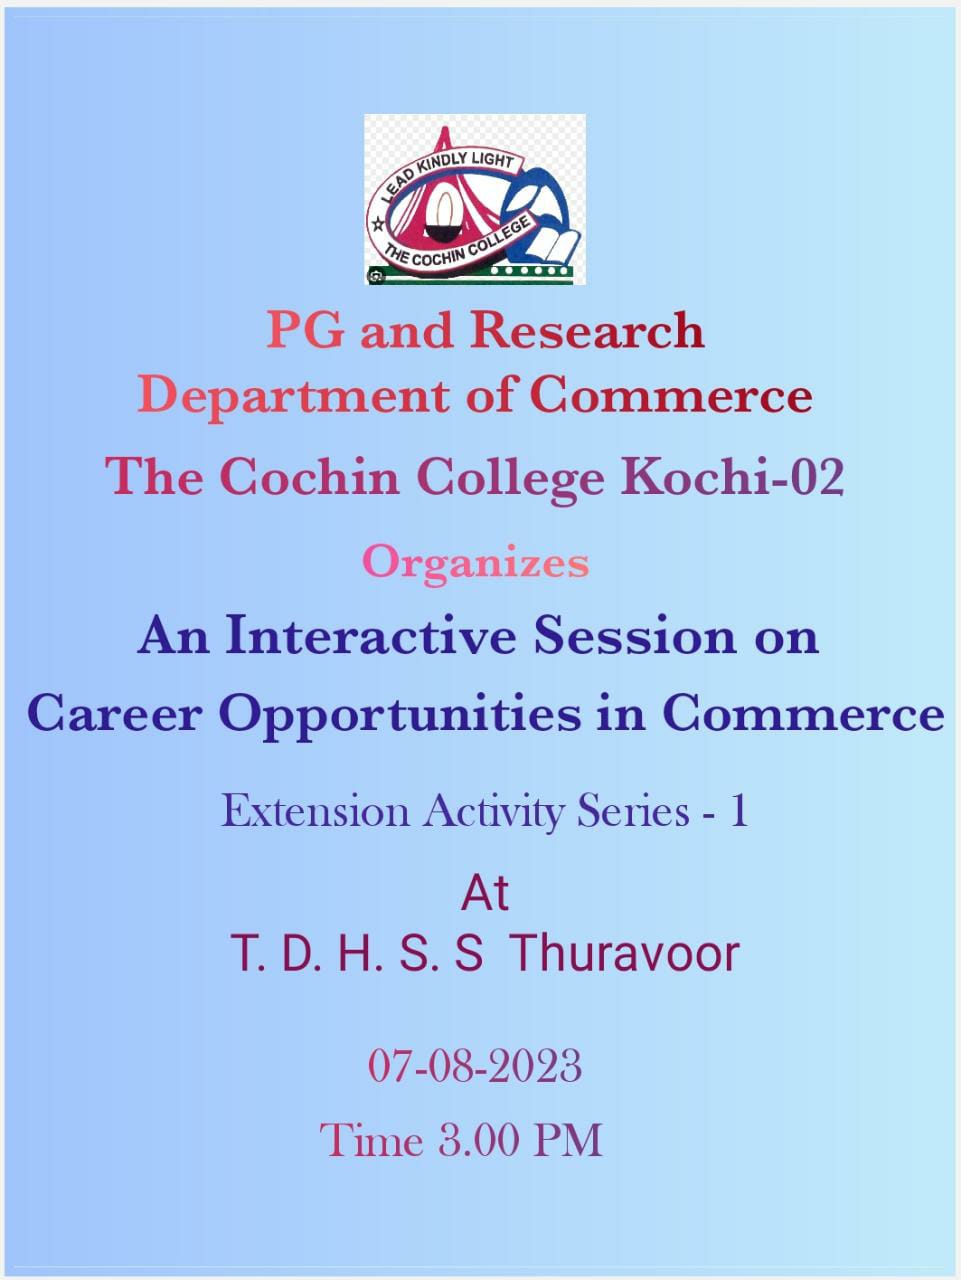 An Interactive Session on Career Opportunities in Commerce